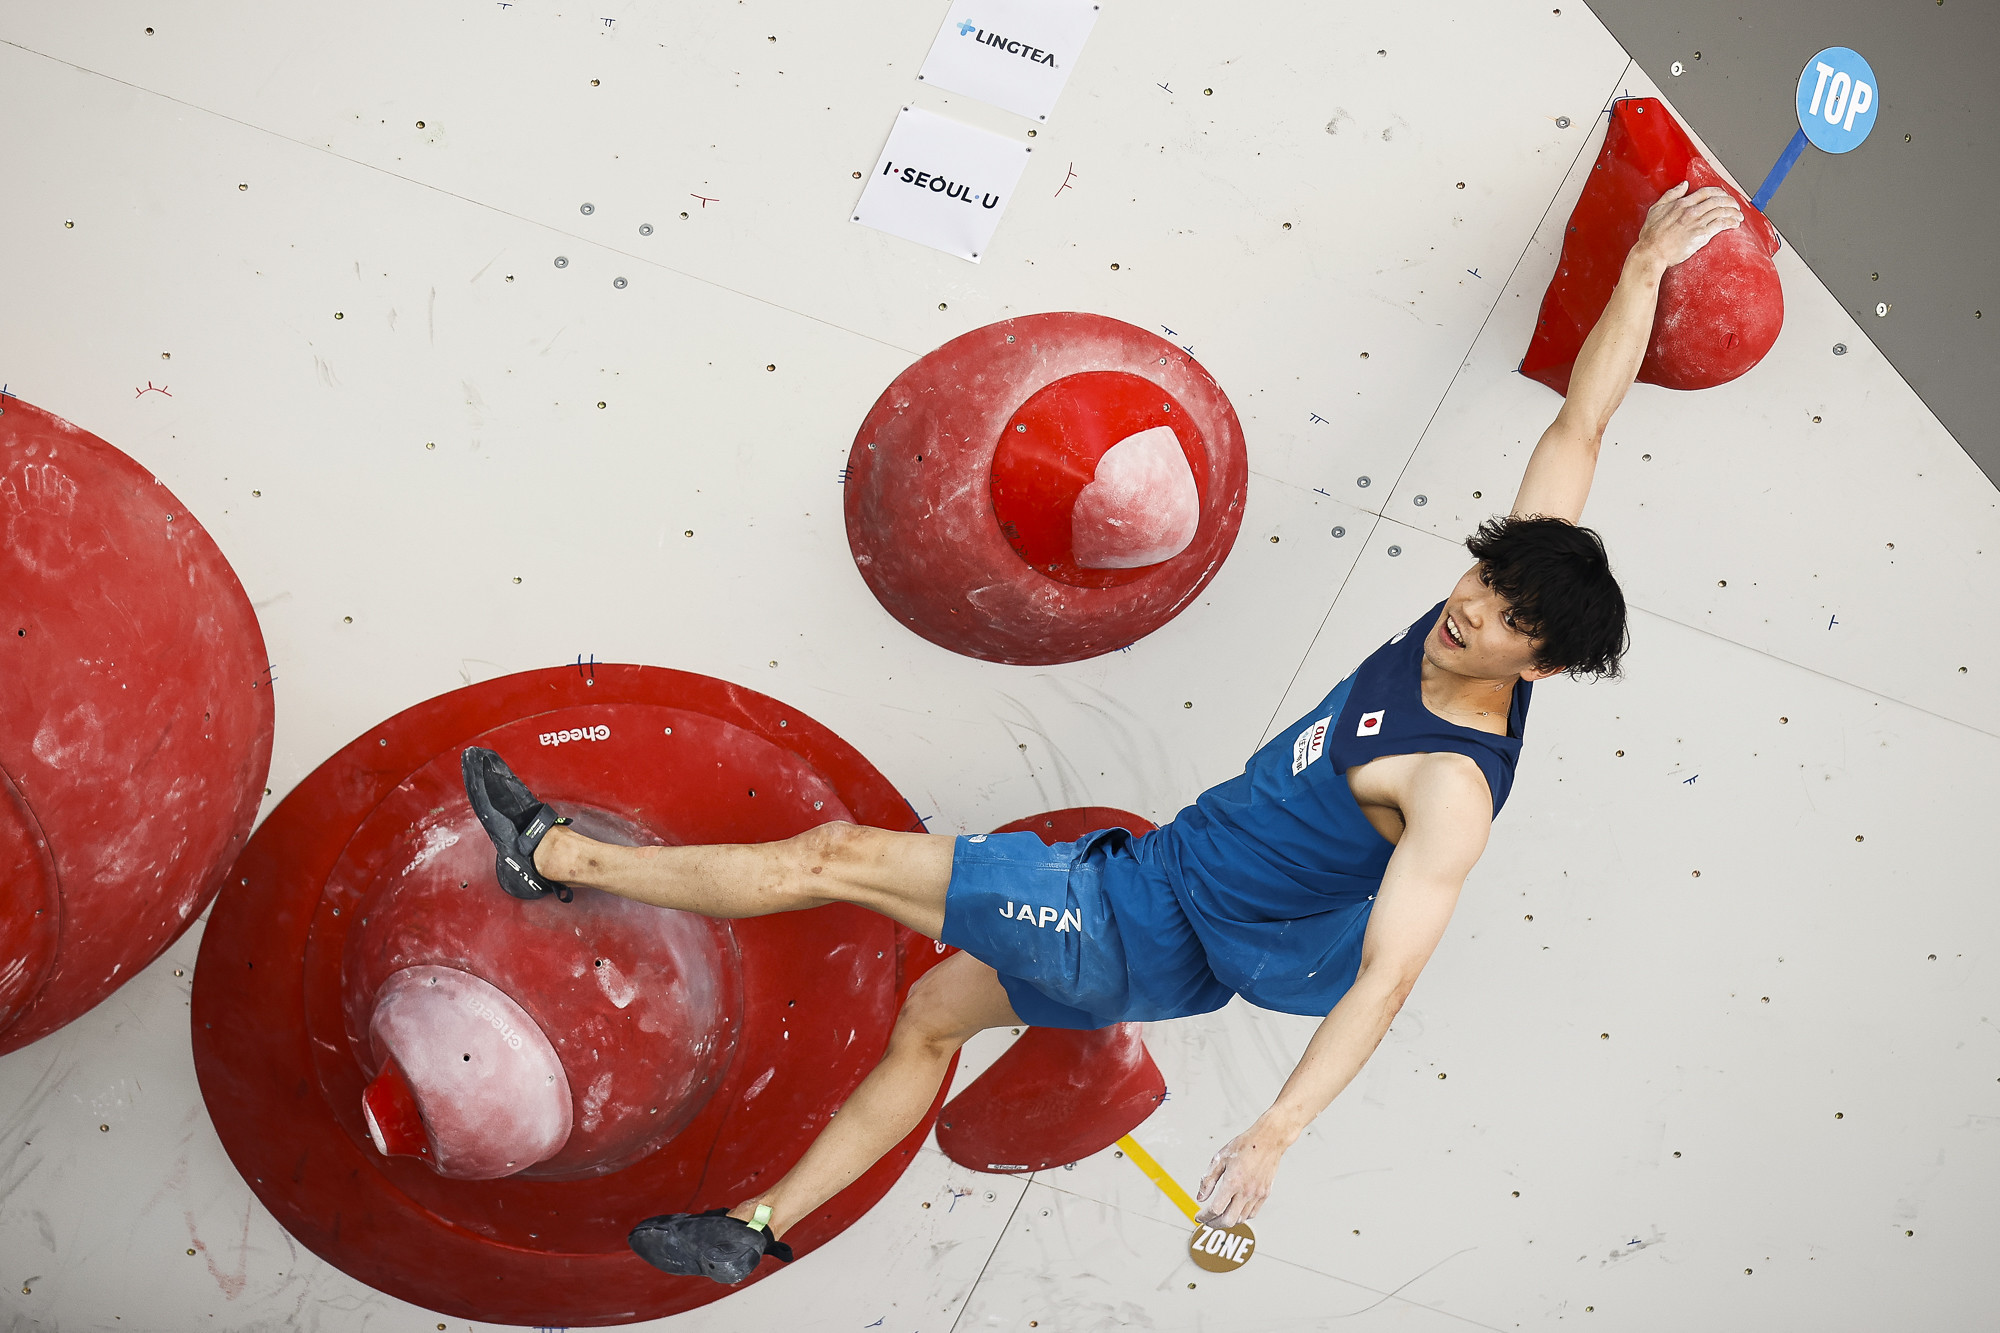 World champions Fujii and Grossman top boulder qualification at Seoul IFSC World Cup